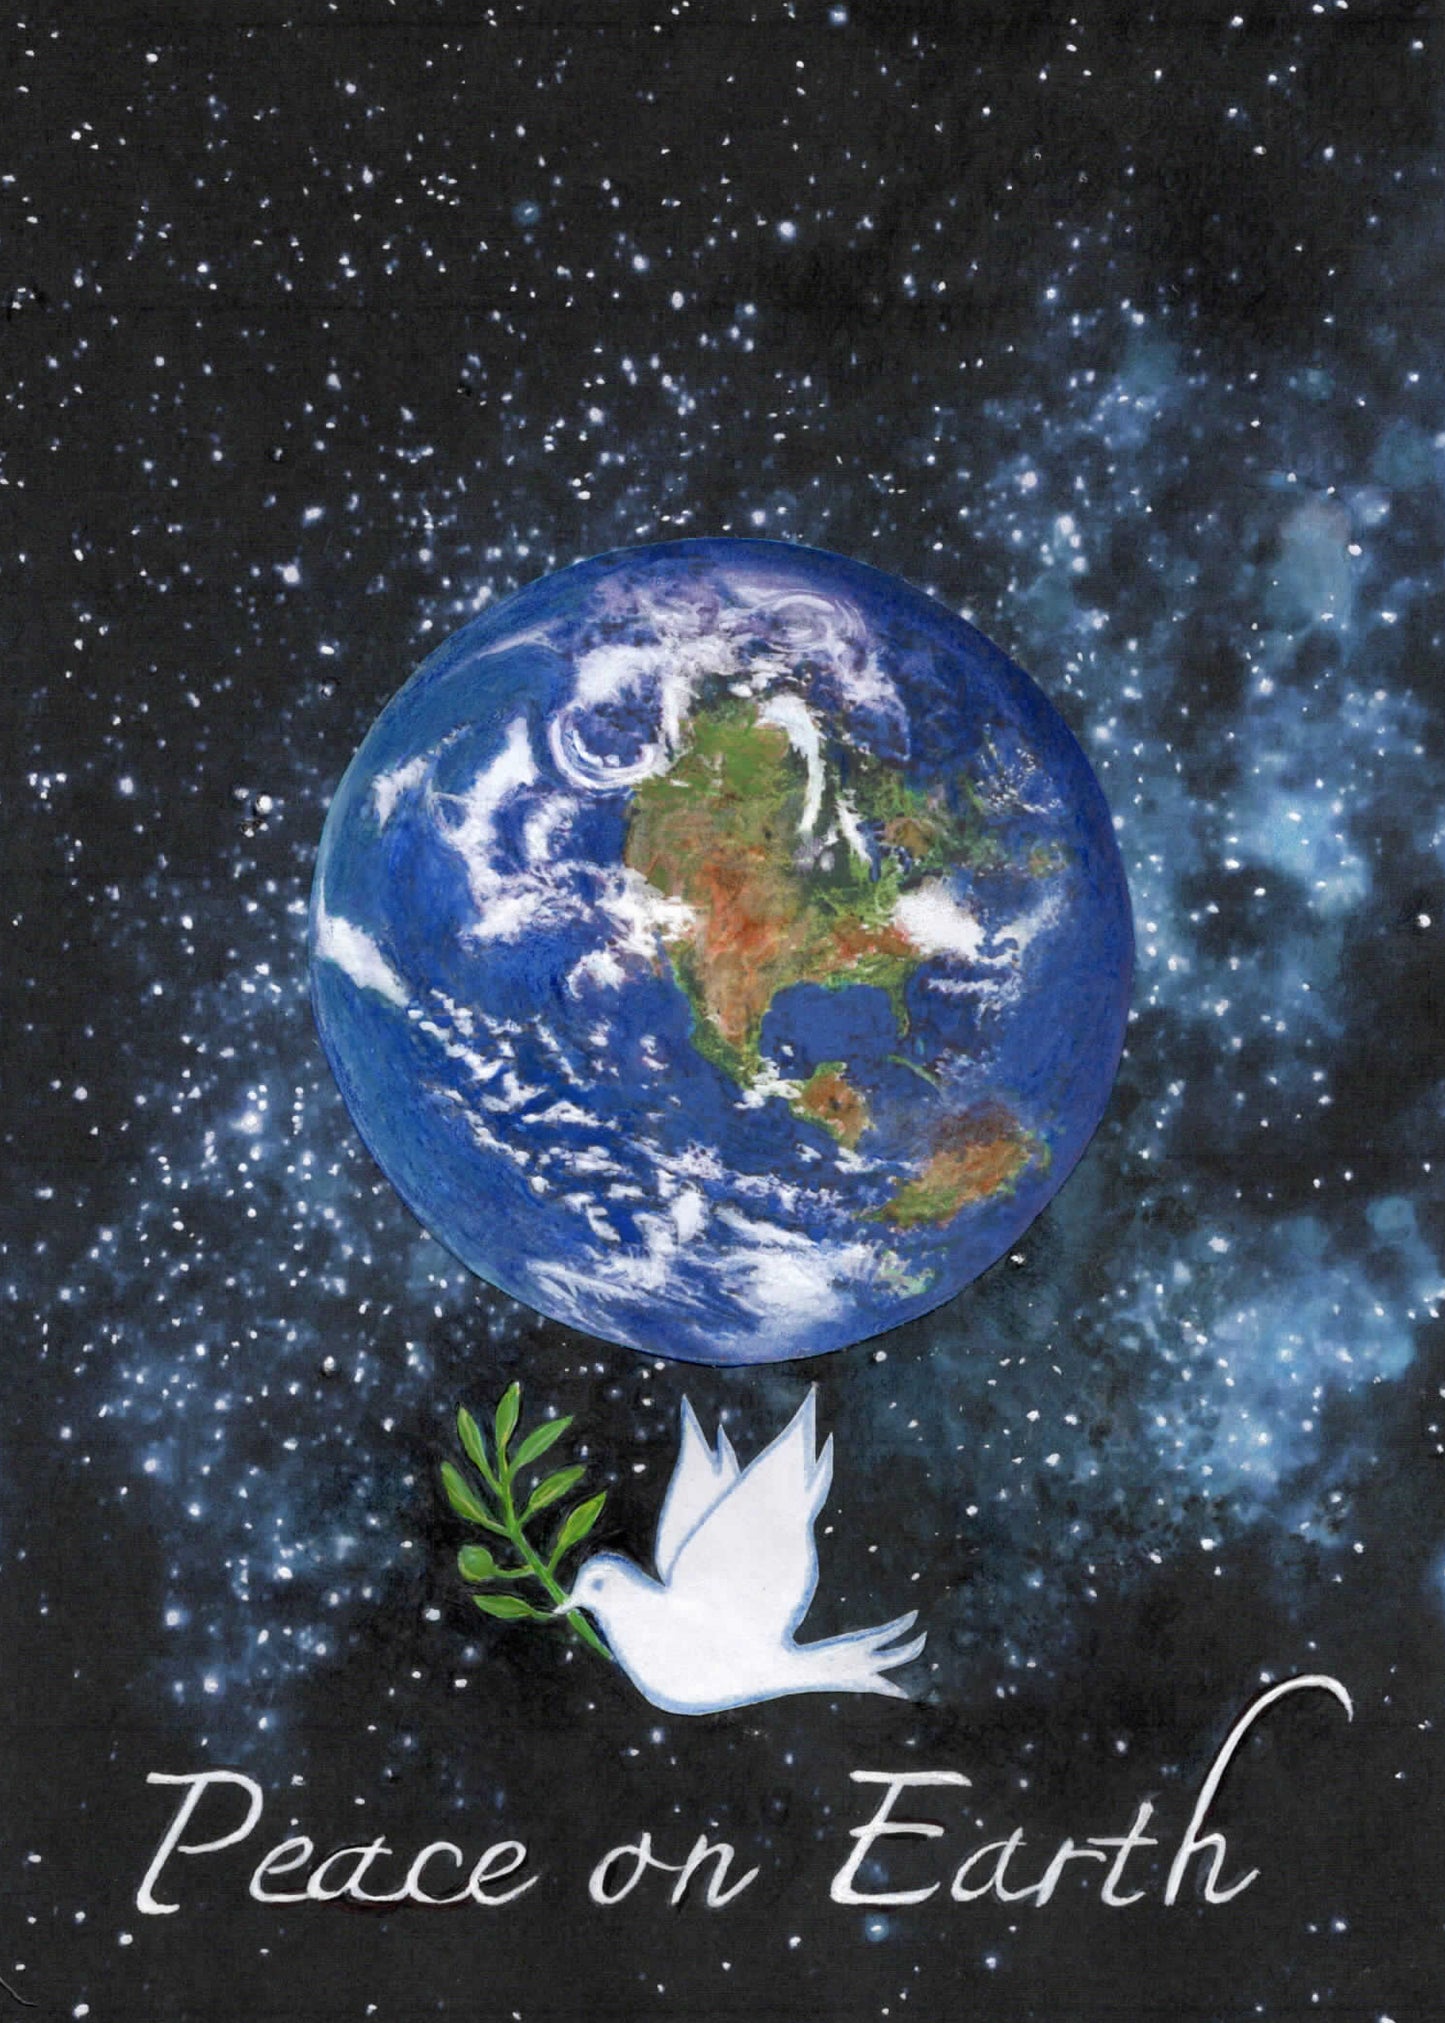 Peace on Earth with Dove and Olive Branch